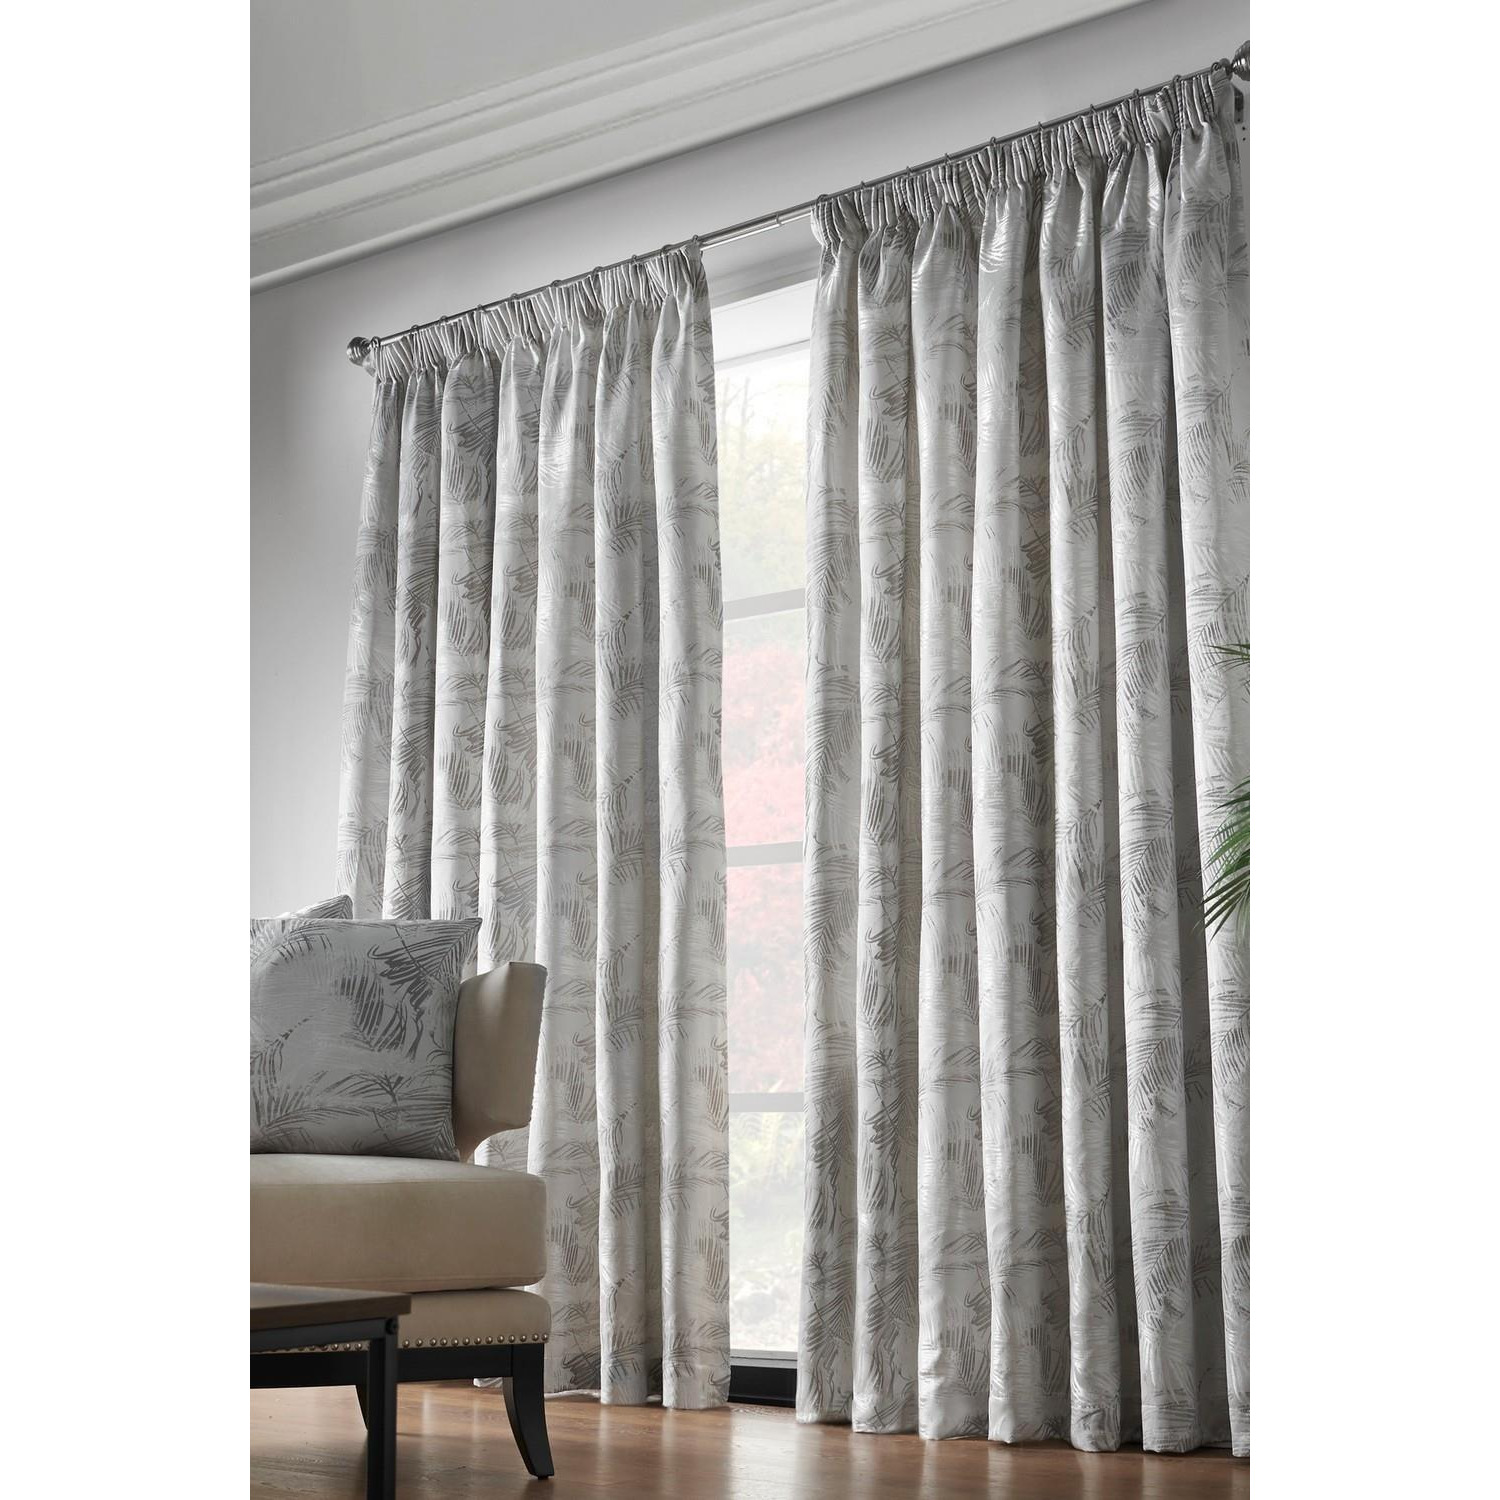 Fiji Lined Taped Pencil Pleat Curtains - image 1